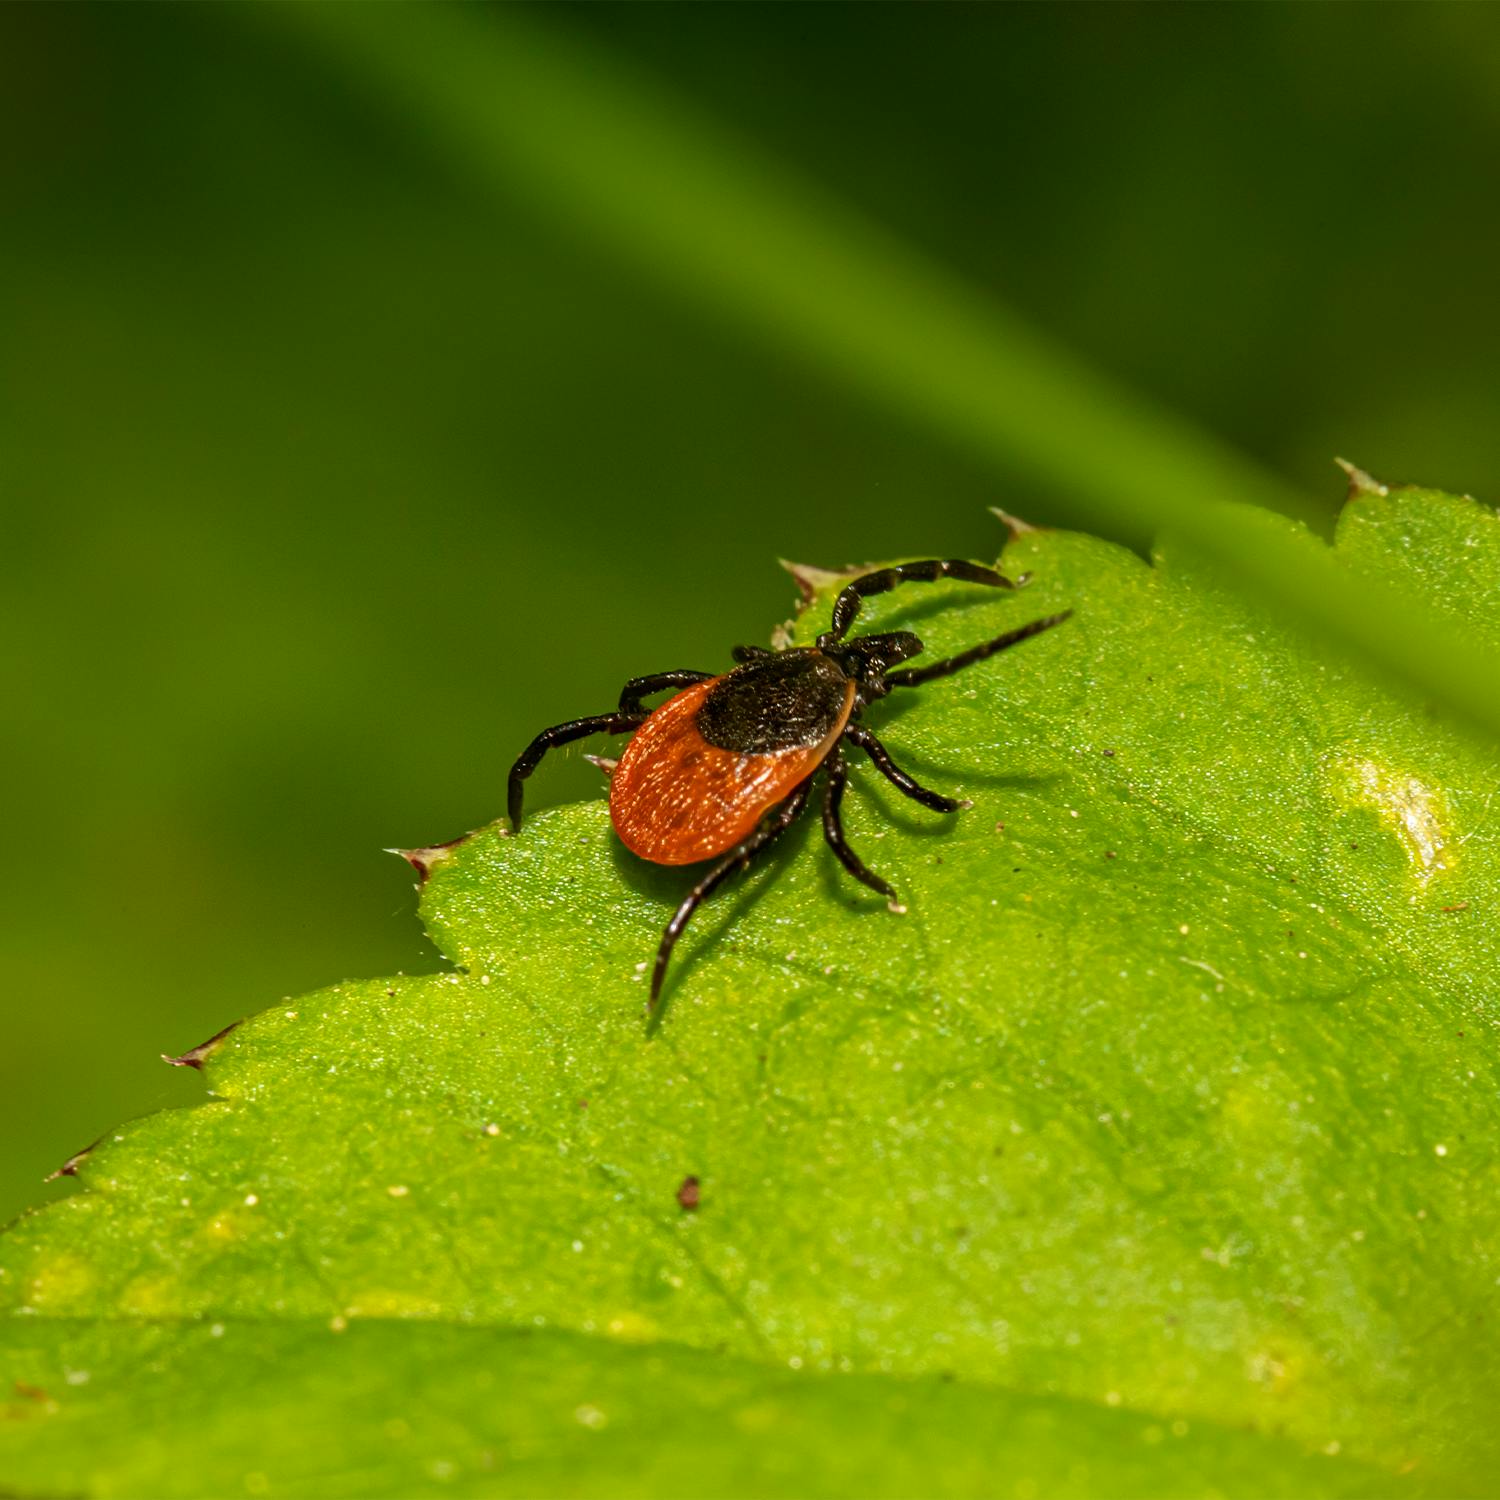 Have you ever had Lyme disease?